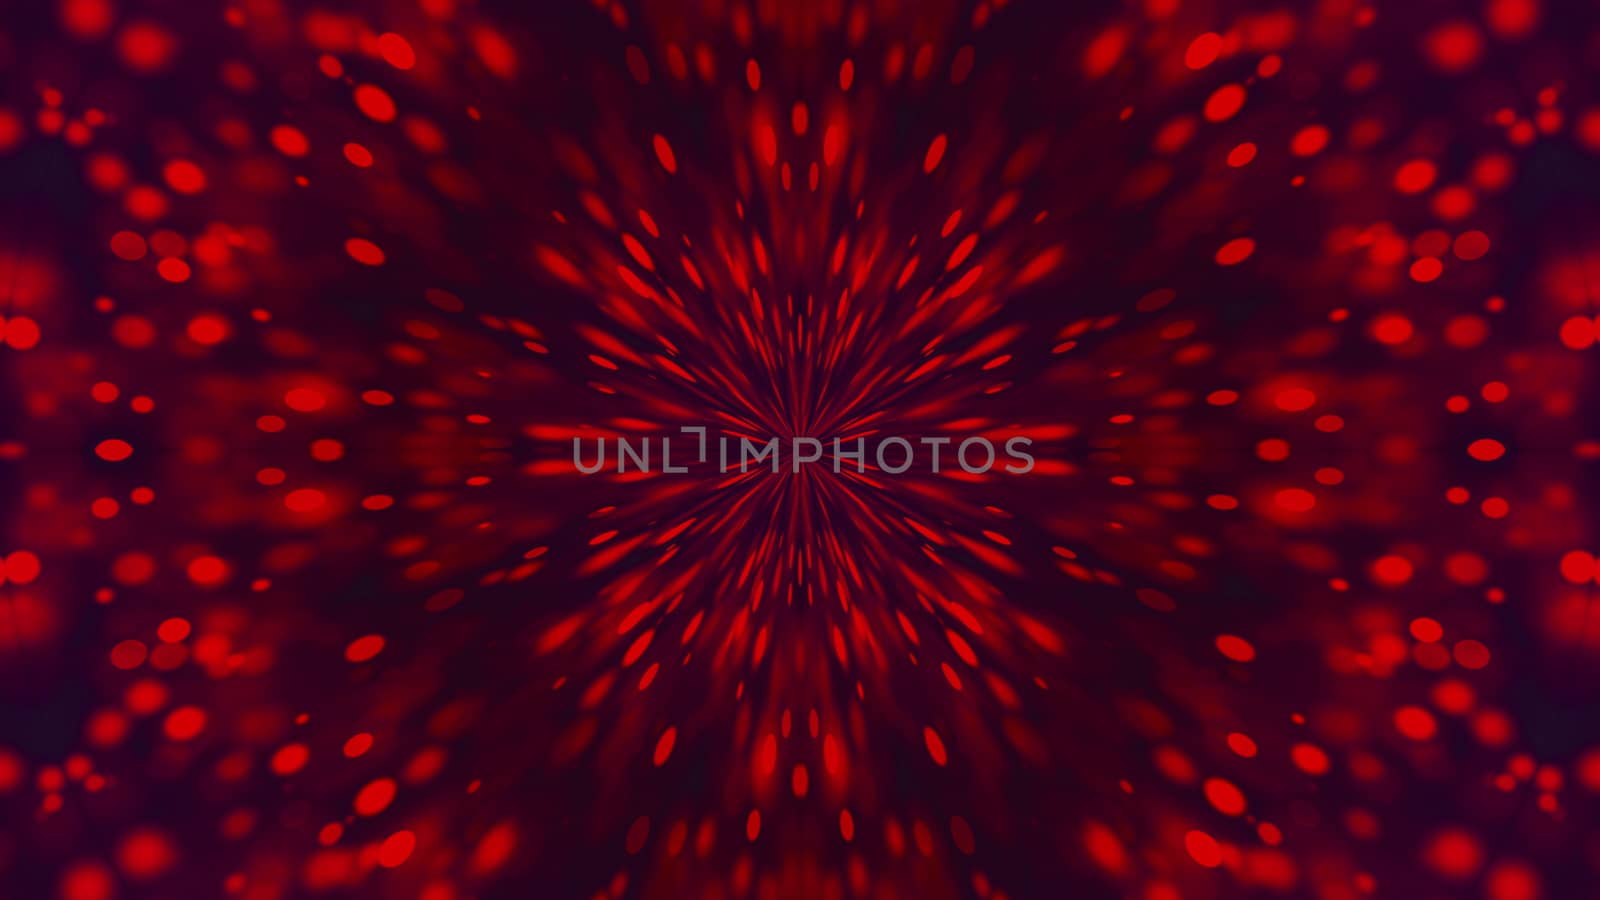 Computer generated a kaleidoscope of red particles flying from the center on a dark background, 3d rendering